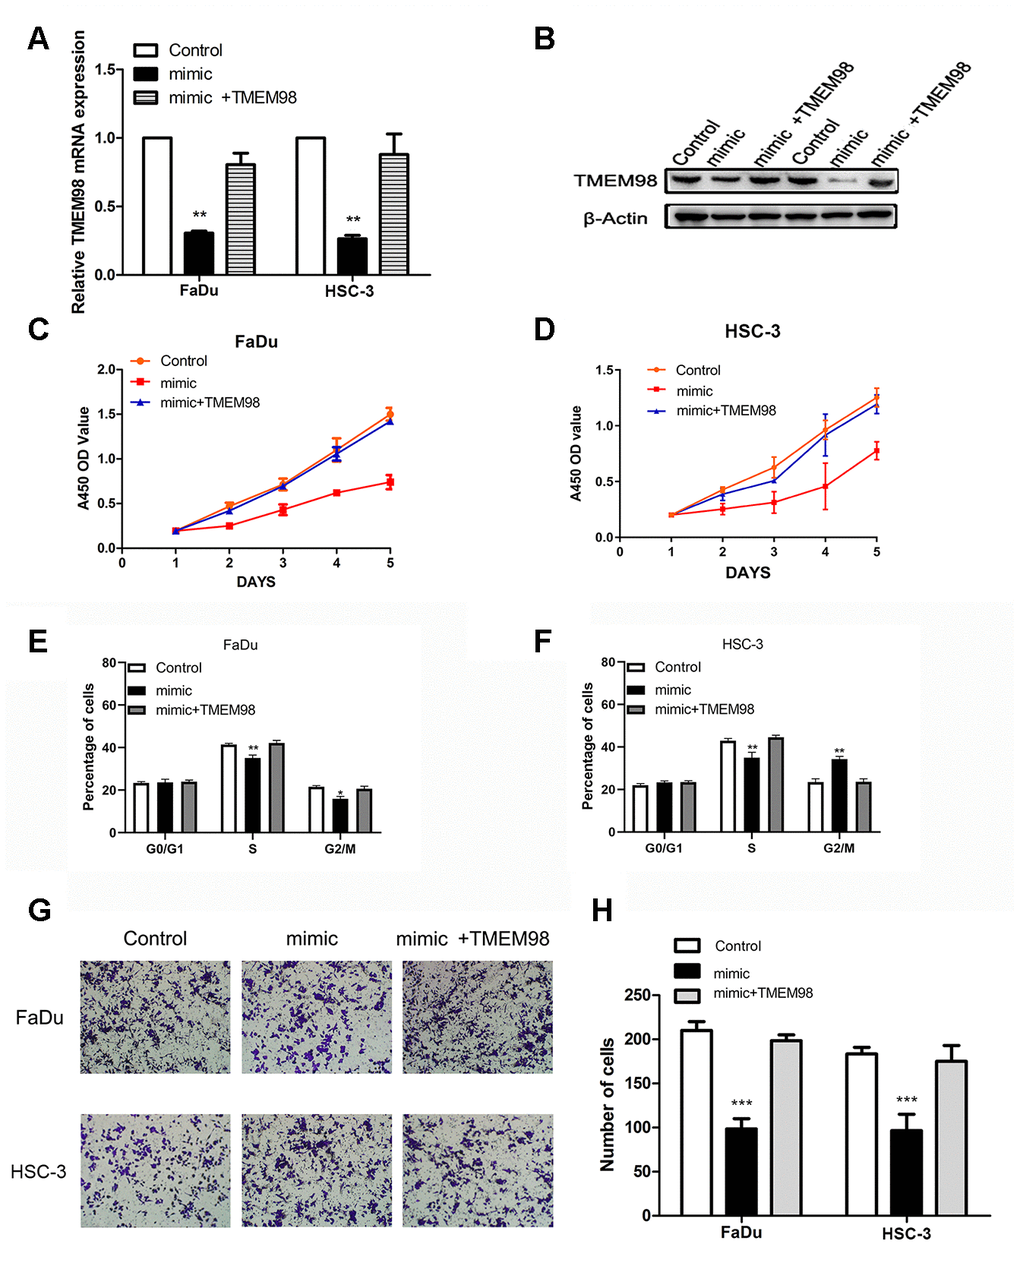 TMEM98 overexpression reverses the tumor suppressor effects of miR-29c-5p. (A, B) TMEM98 expression in FaDu and HSC-3 cells transfected with miR-29c-5p mimics, miR-29c-5p mimics combined with the TMEM98-overexpression plasmid, or control. (C, D) Cell proliferation was significantly lower in cells with upregulated miR-29c-5p expression, while cell numbers were restored to those of the control. (E, F) Cell cycle analysis of HNSCC cells transfected with miR-29c-5p mimics, miR-29c-5p mimics combined with the TMEM98-overexpression plasmid, or control. (G, H) Cell migration was significantly decreased in cells transfected with the miR-29c-5p mimic and increased after upregulation of TMEM98 expression. *p 